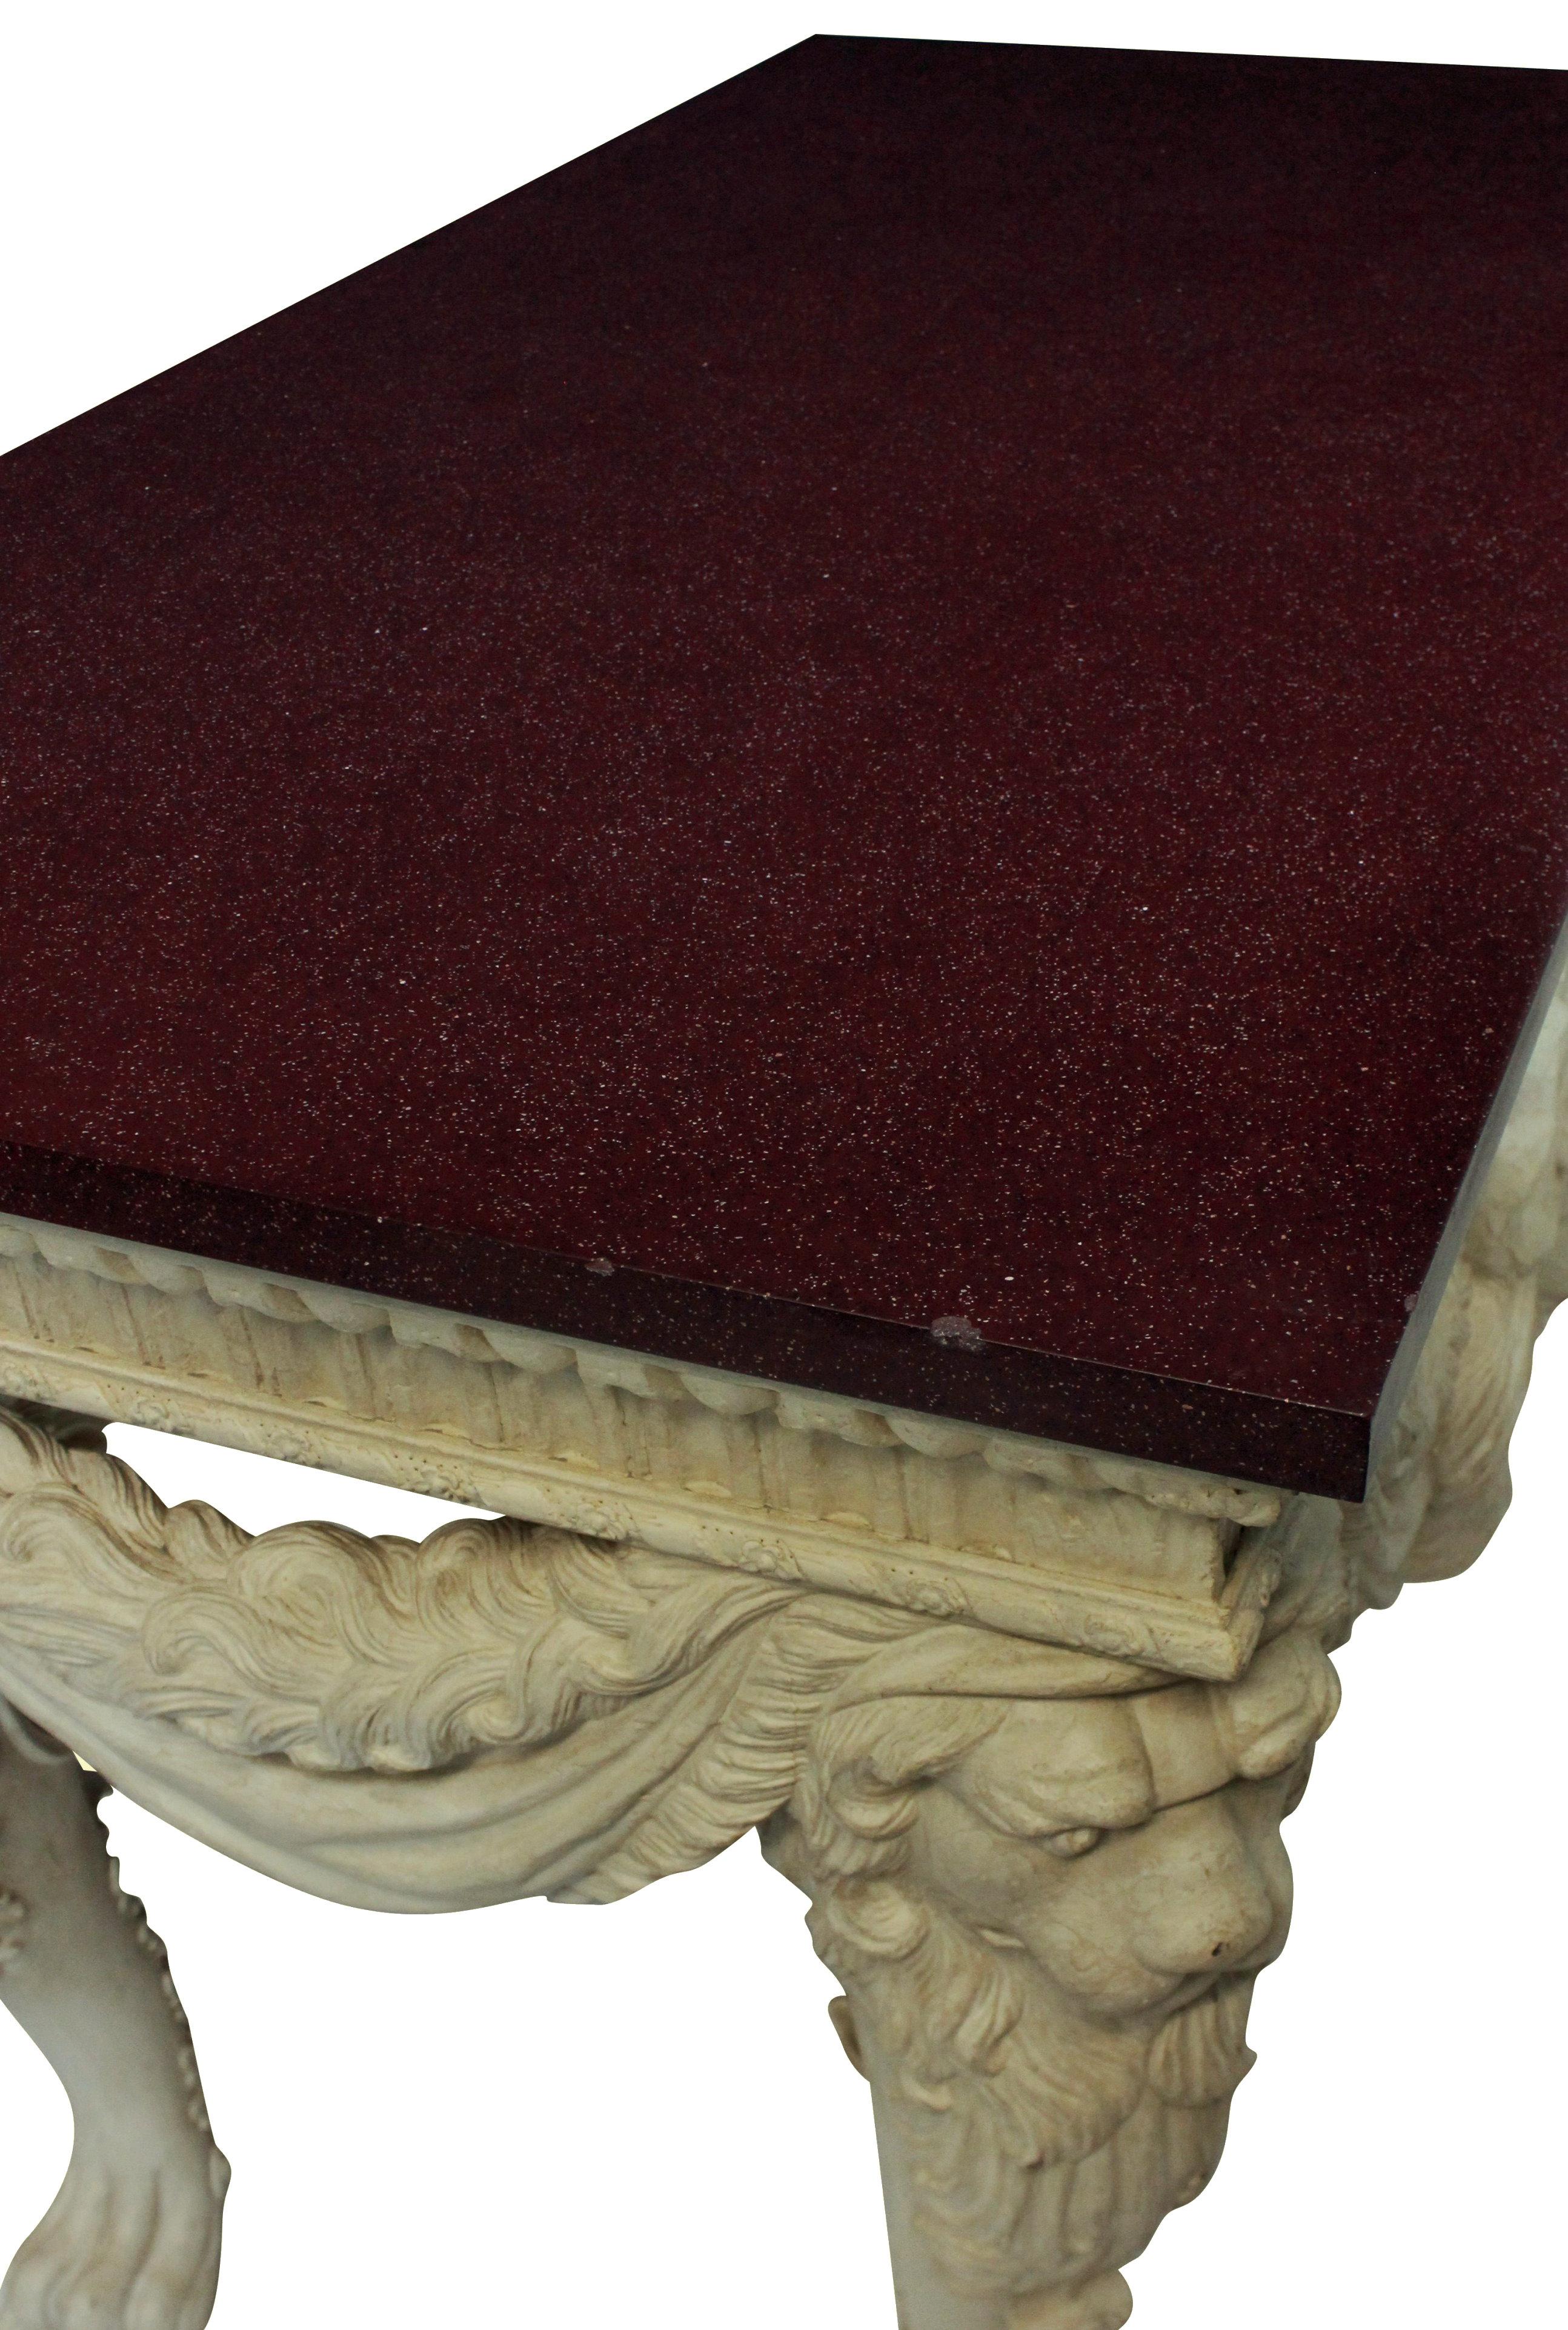 Early 20th Century English Carved and Painted Mahogany Console Table with a Solid Porphyry Top